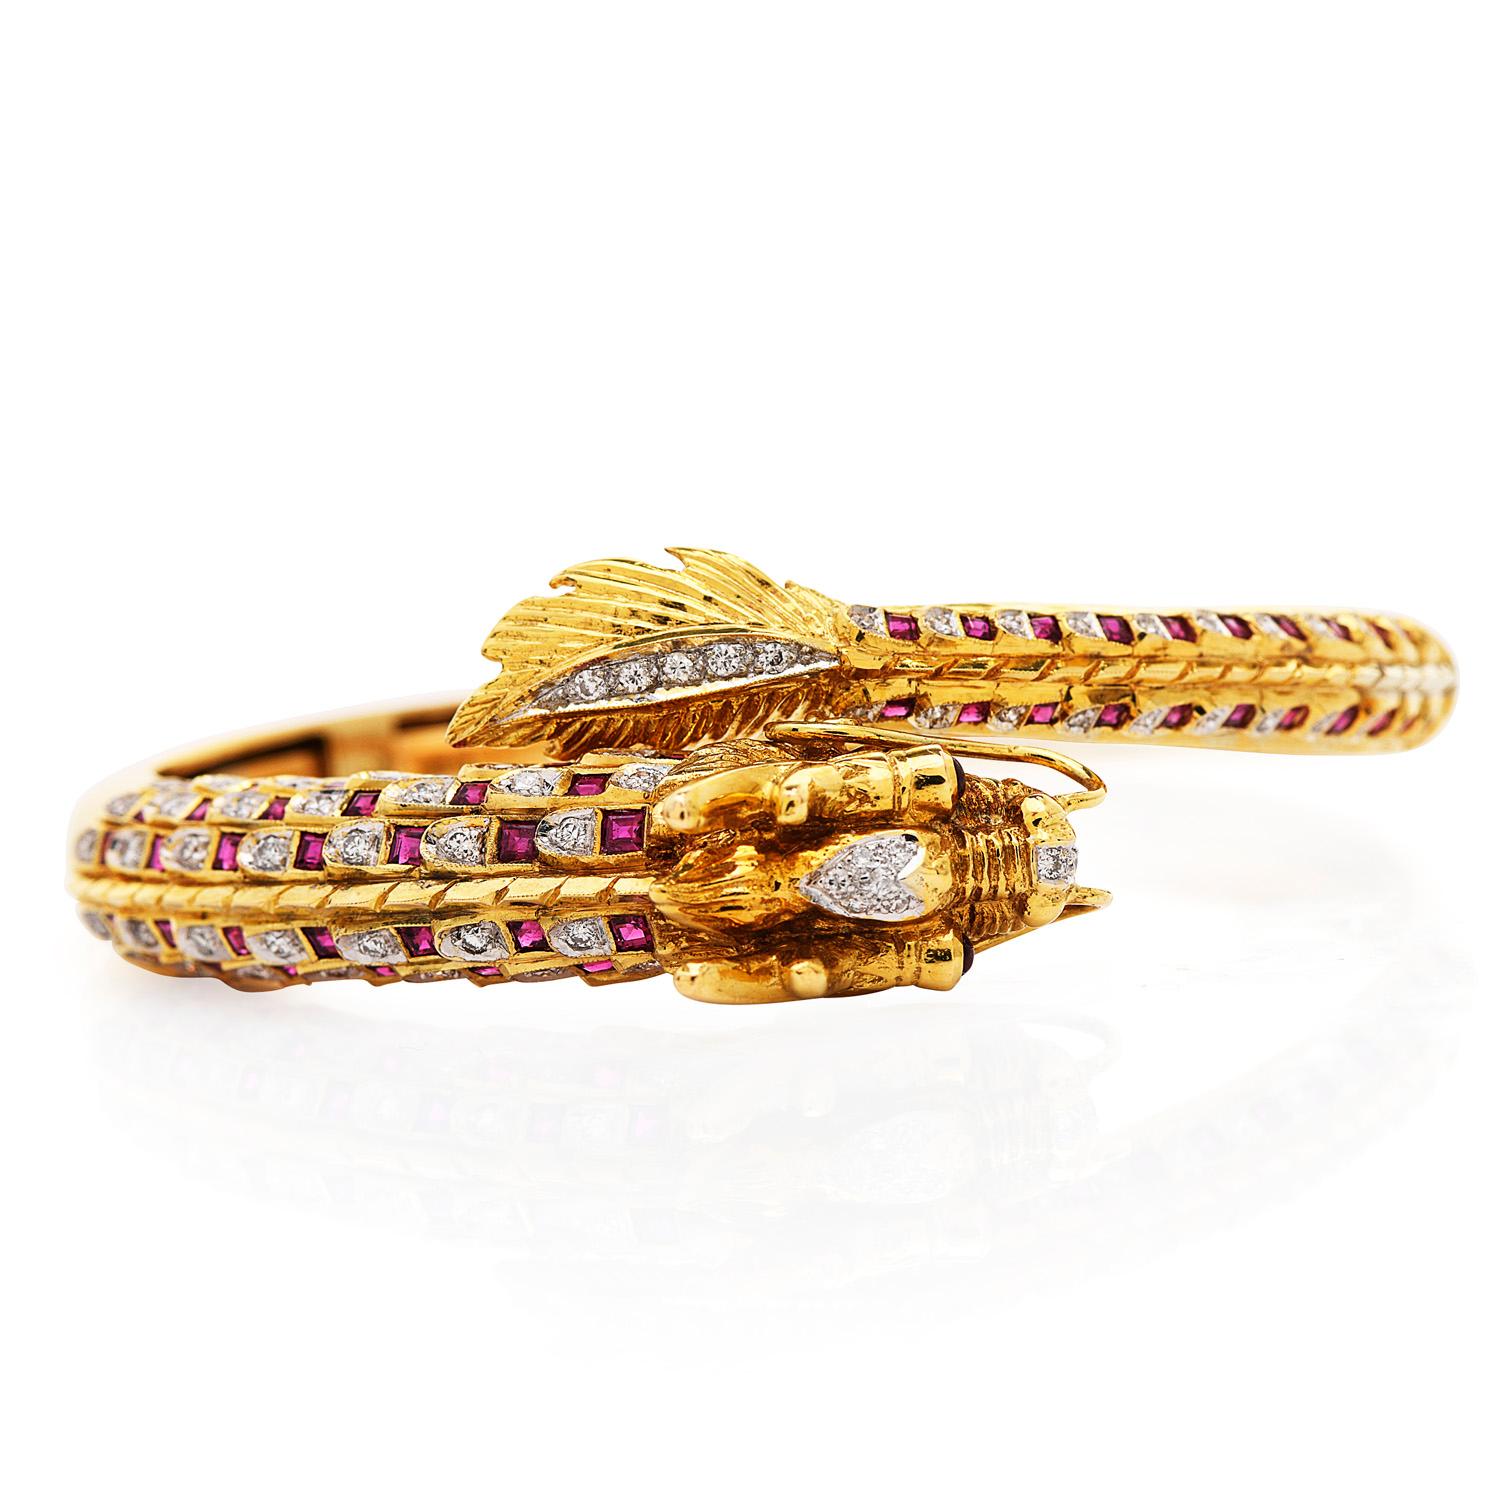 Vintage exquisite Asian Dragon Highly Detailed 18K Gold Bangle Bracelet, 

Its mystical eyes are represented by two genuine Rubies in a round shape and bezel set and  (49) genuine Rubies in a square shape and bezel set, totaling carats. , totaling